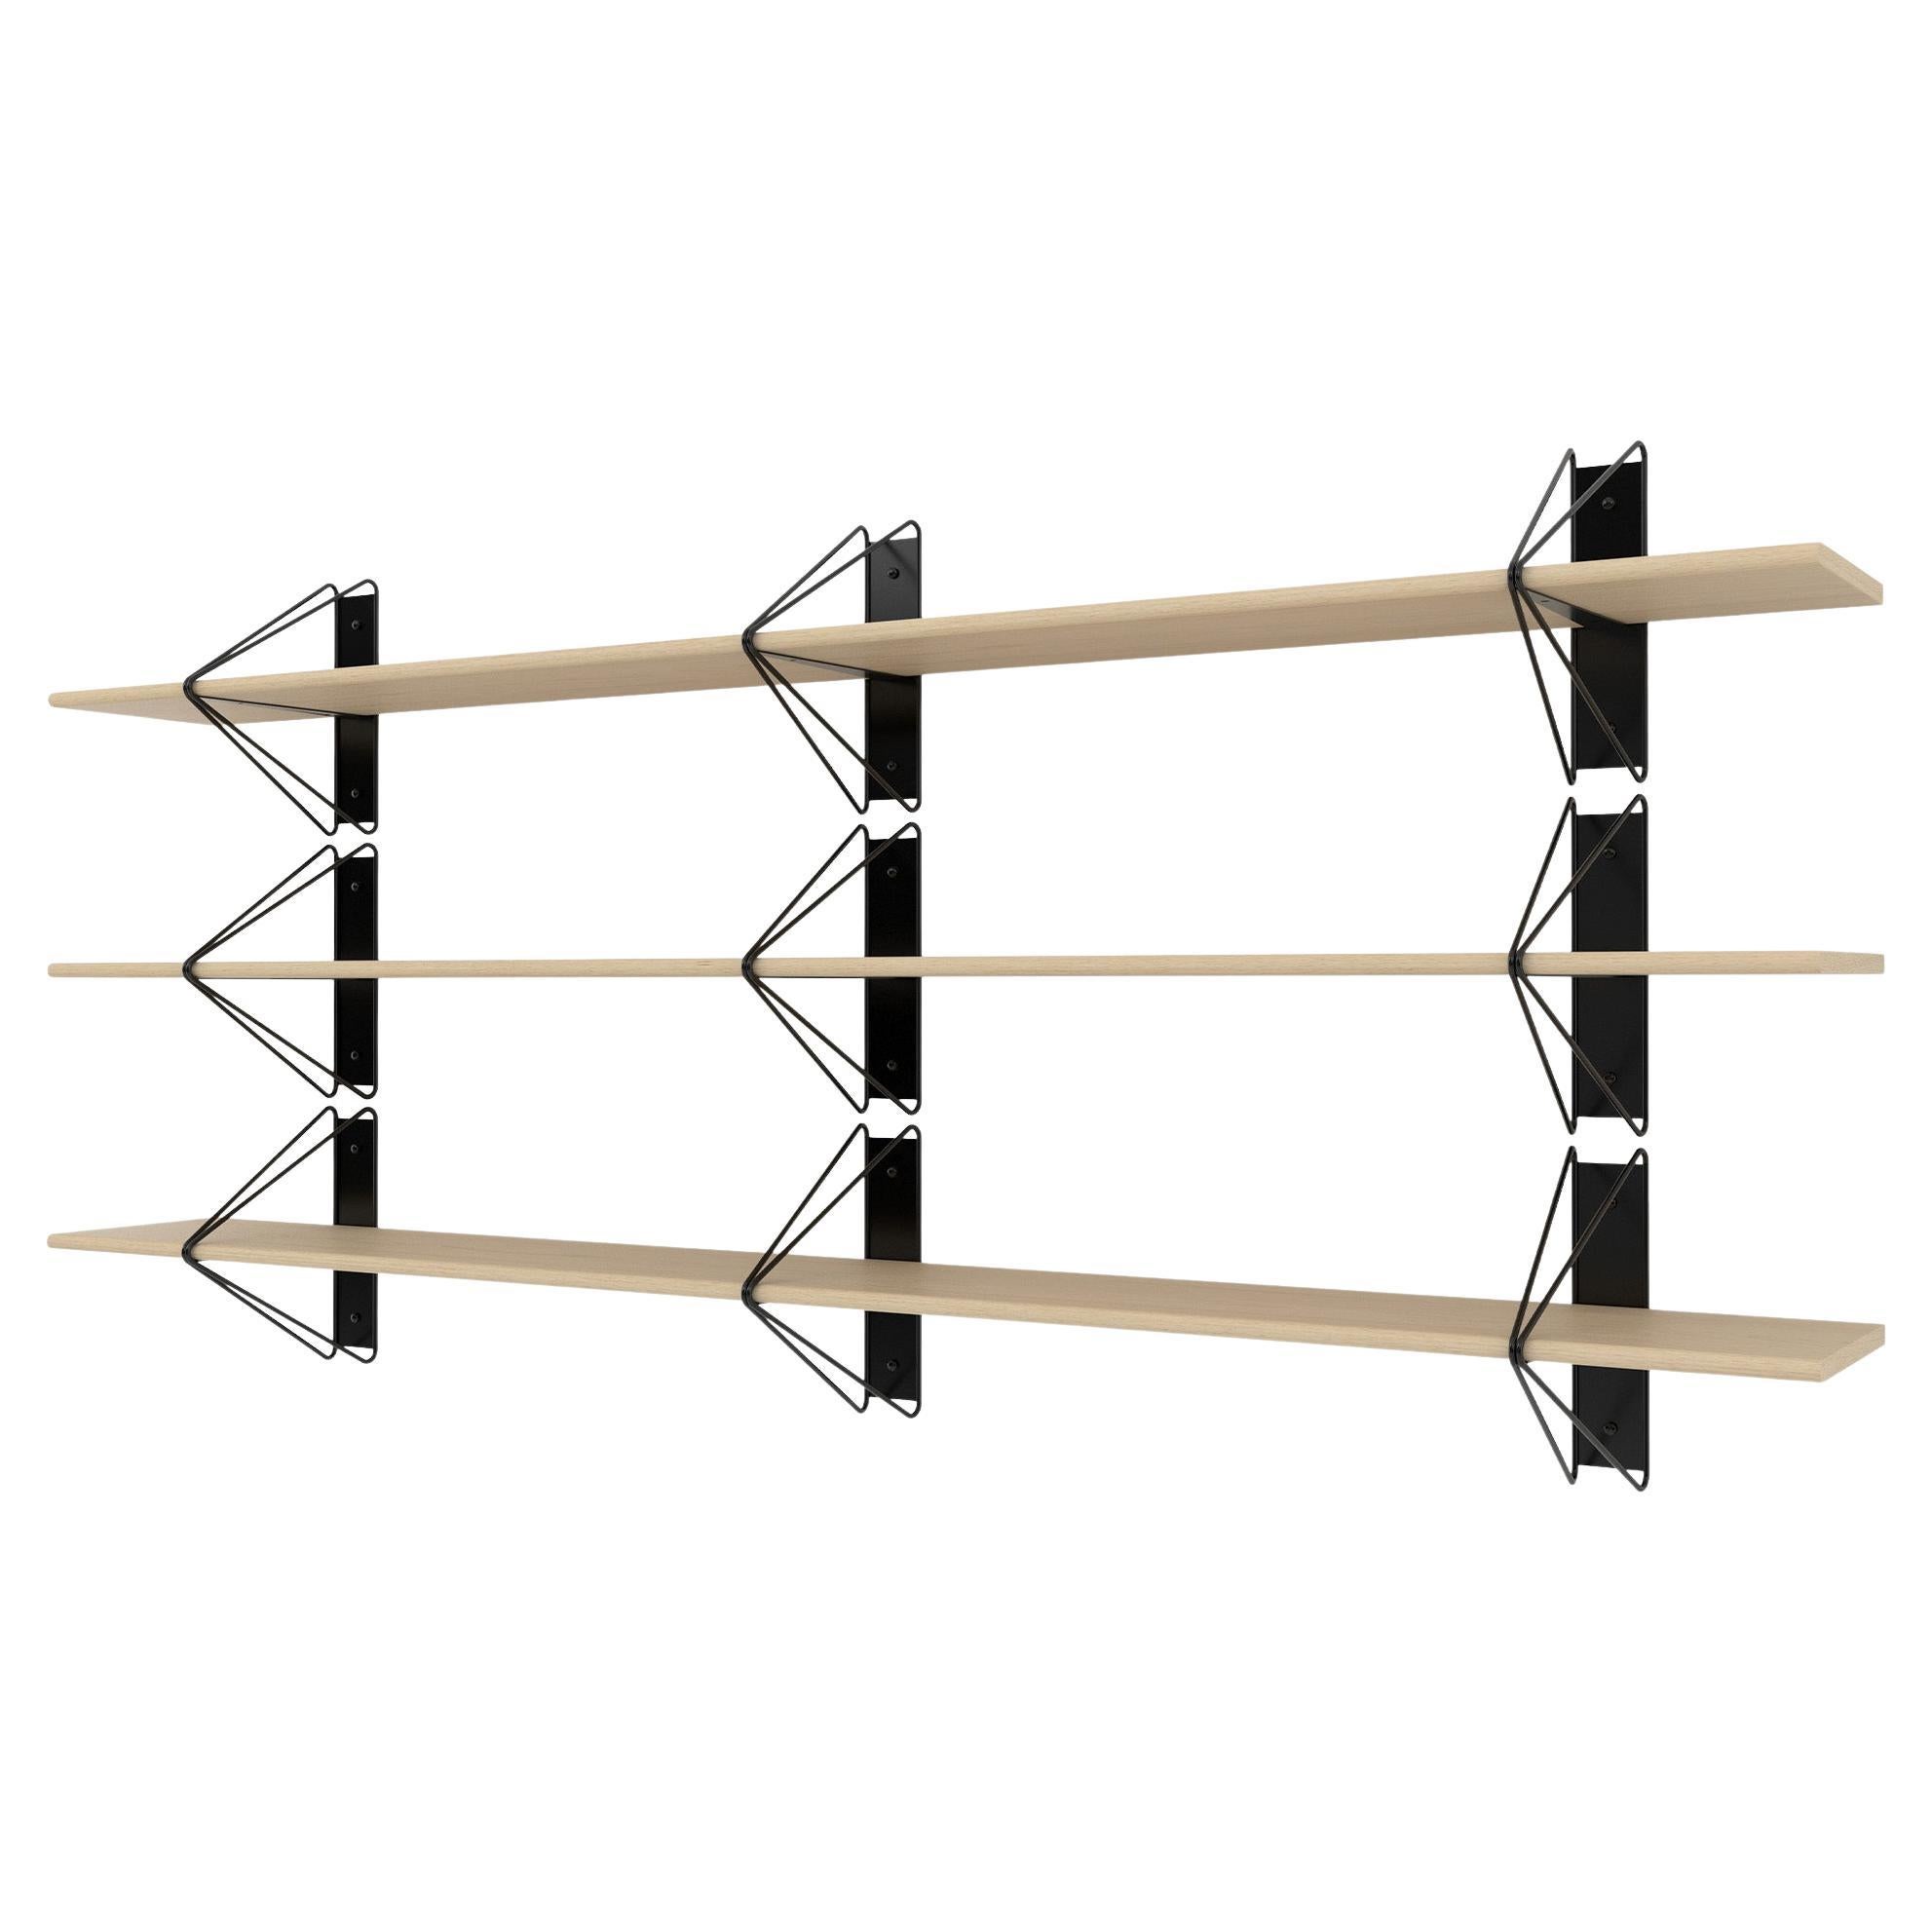 Set of 3 Strut Shelves from Souda, 84in, Black and Maple, Made to Order